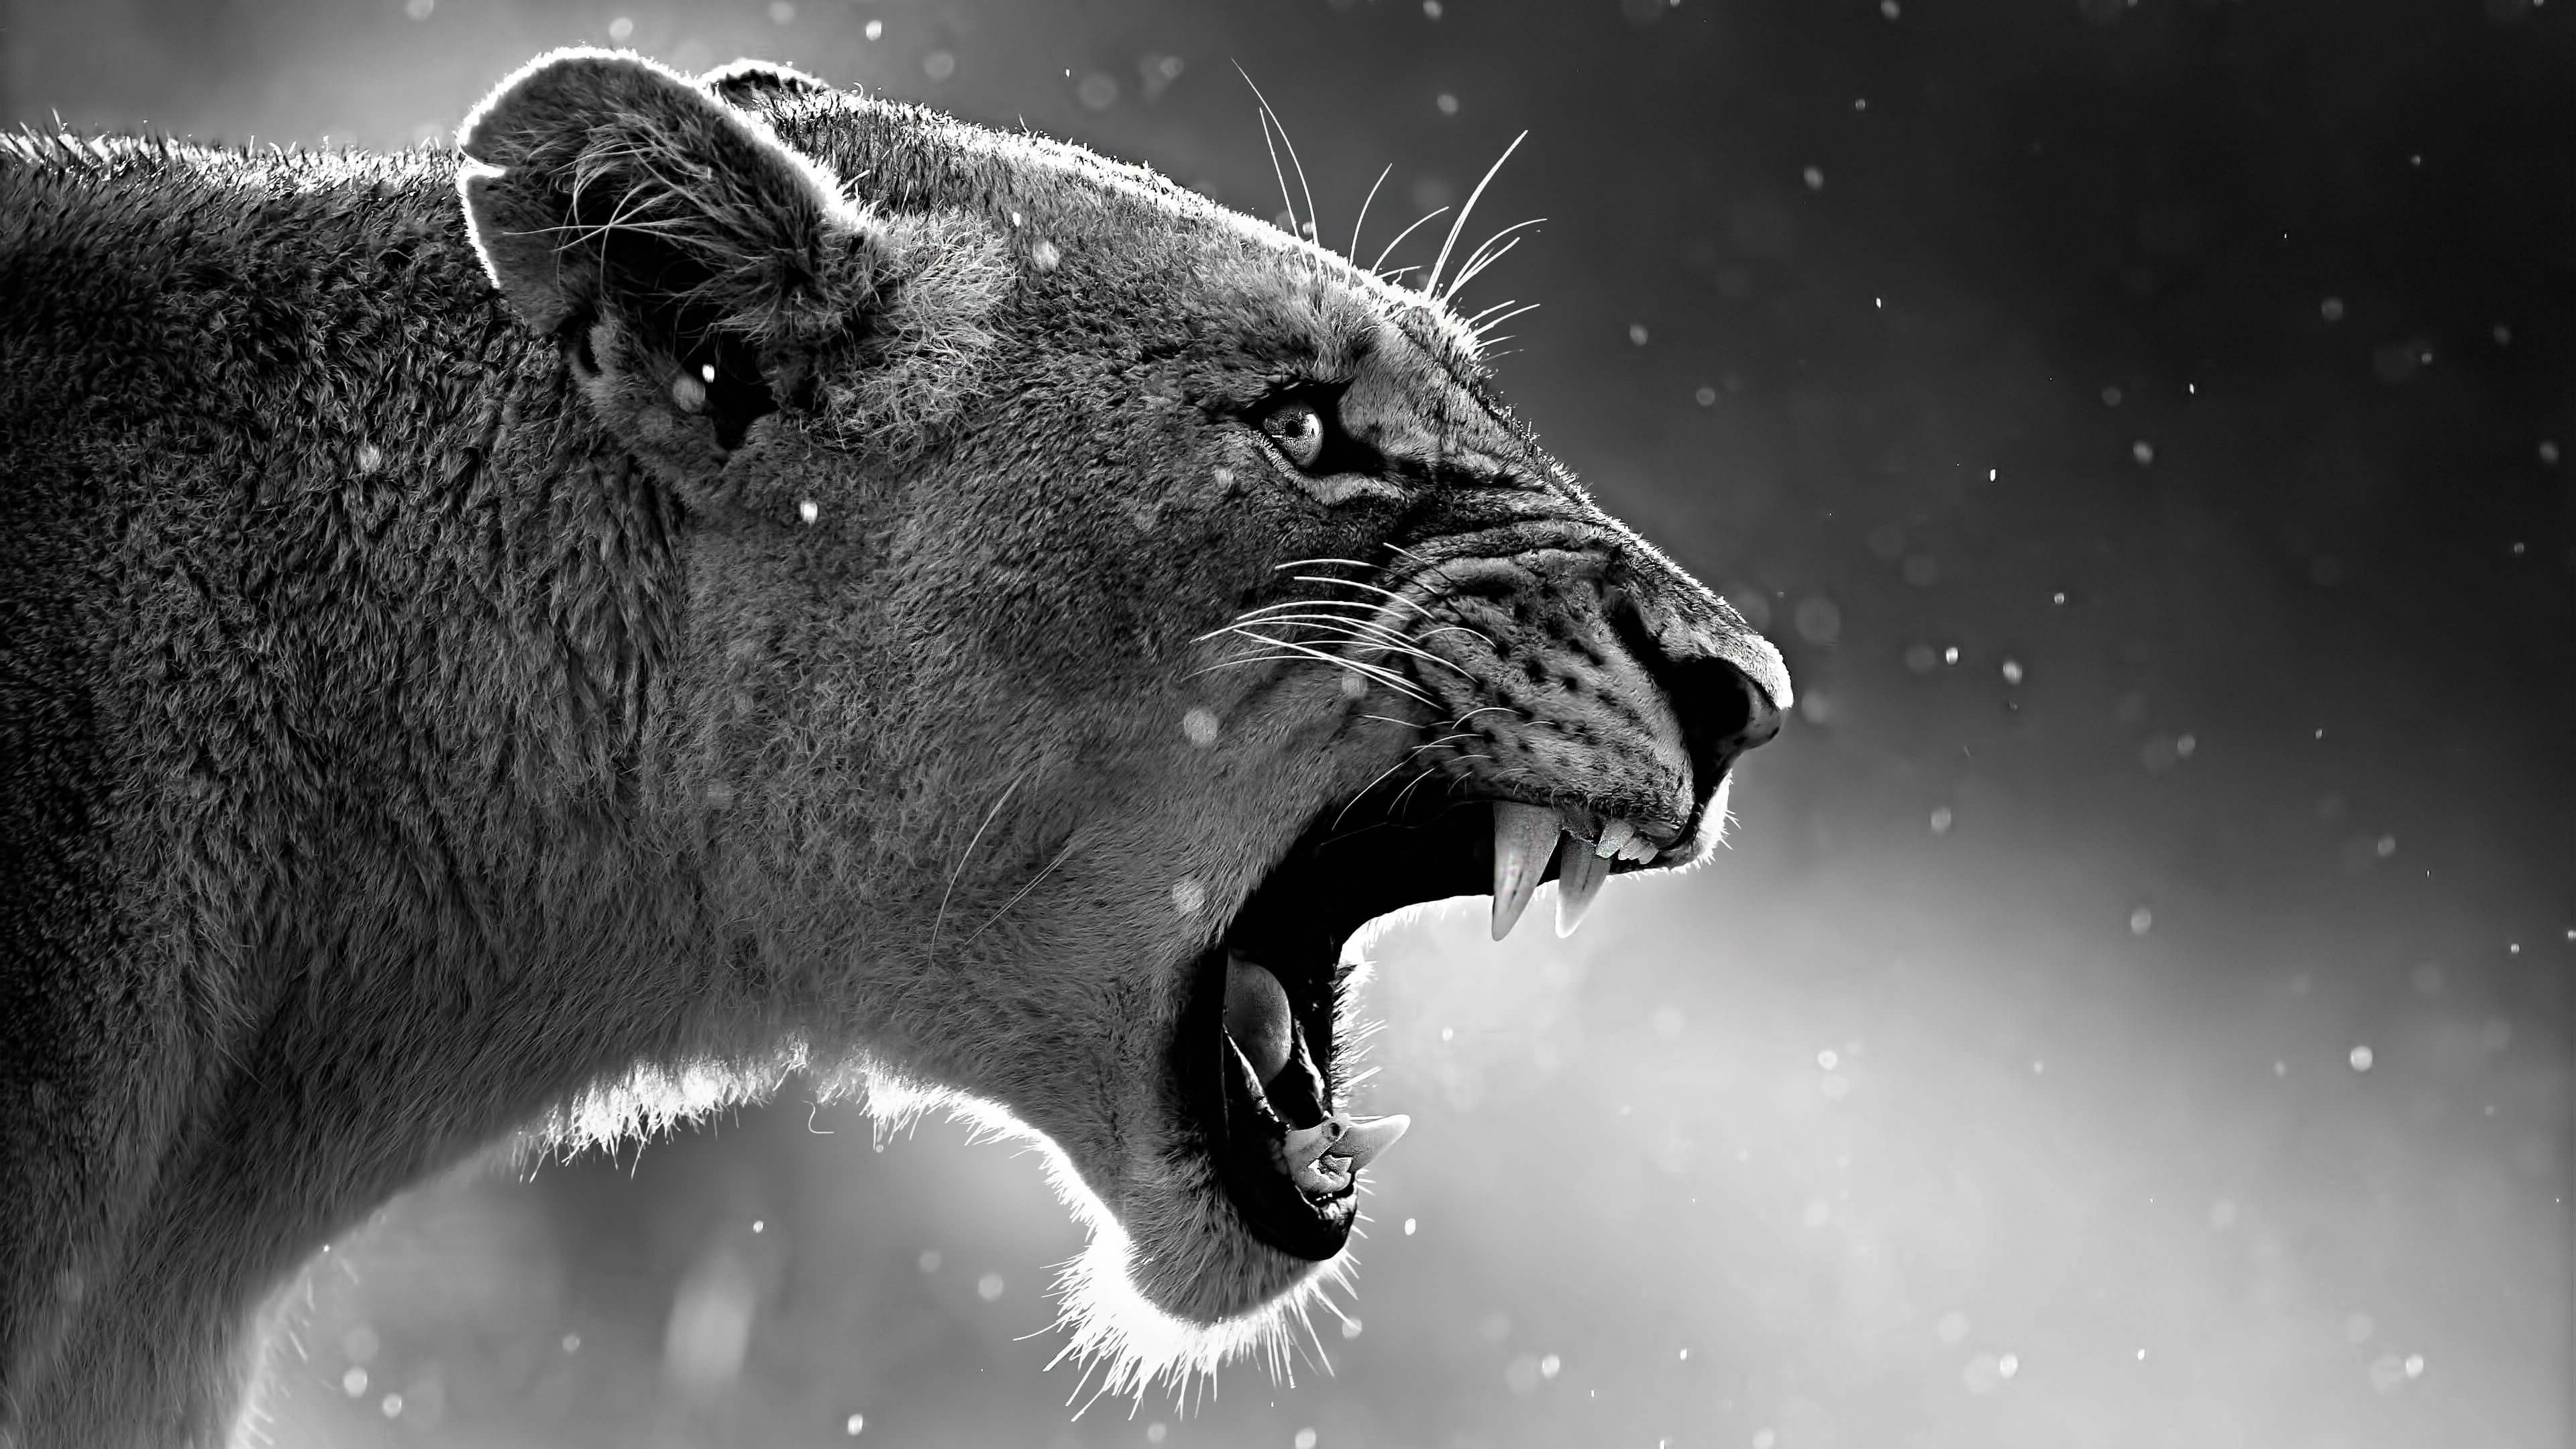 A lioness snarls in the snow - Lion